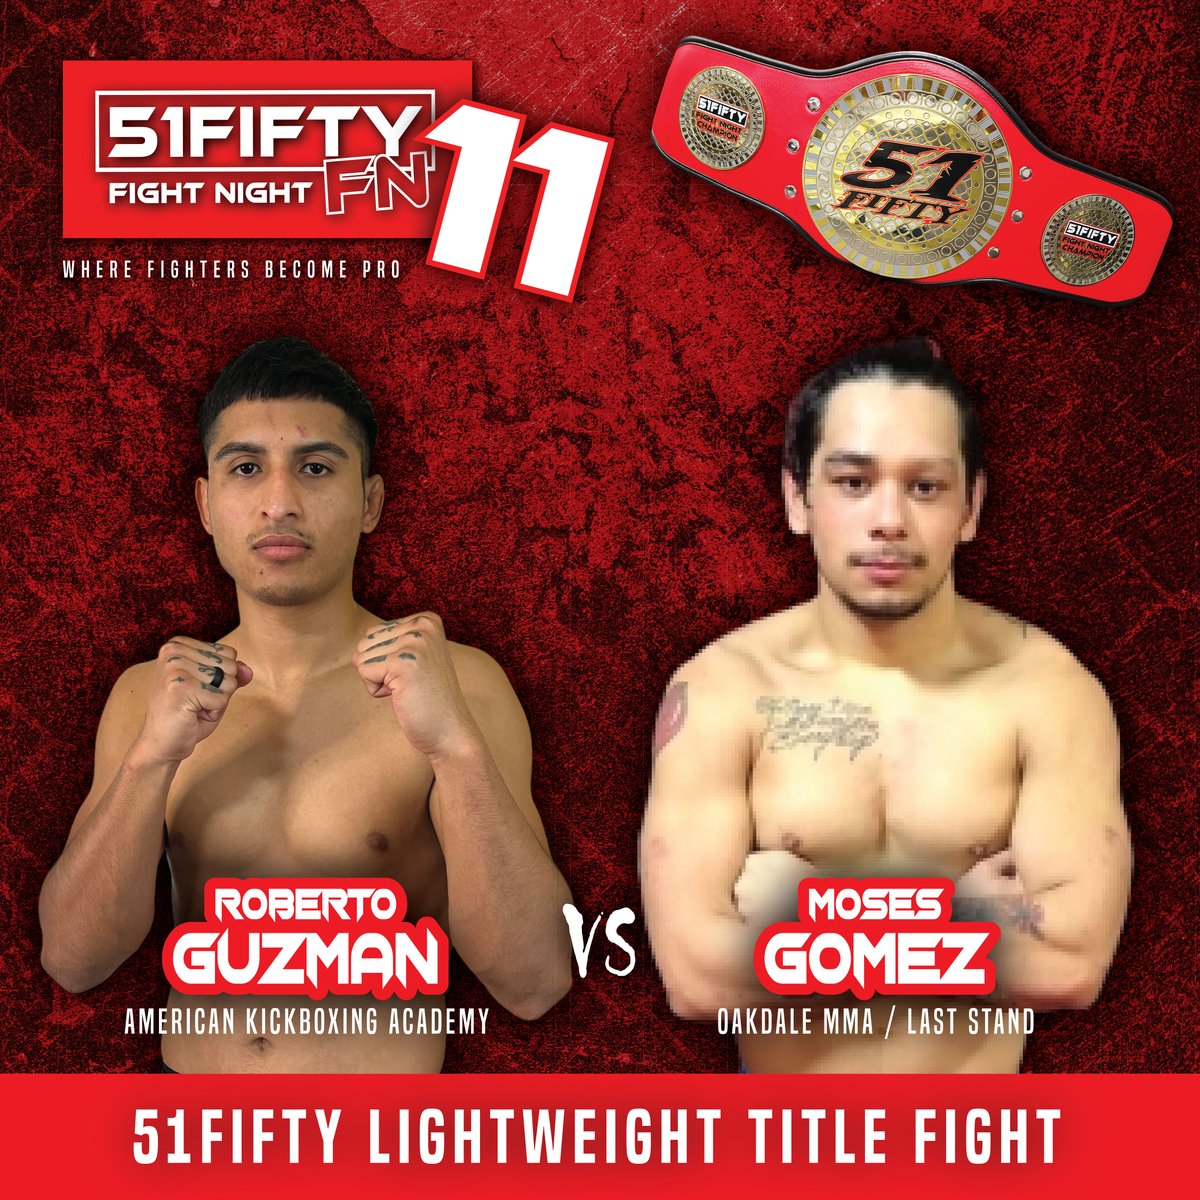 #51FIFTY Title Fight match-ups! Roberto Guzman vs. Moses Gomez for the 51FIFTY Lightweight Title!
....
Tickets available at 51fiftyltm.com/fightnight
....
#fightnight #mma #cagefight